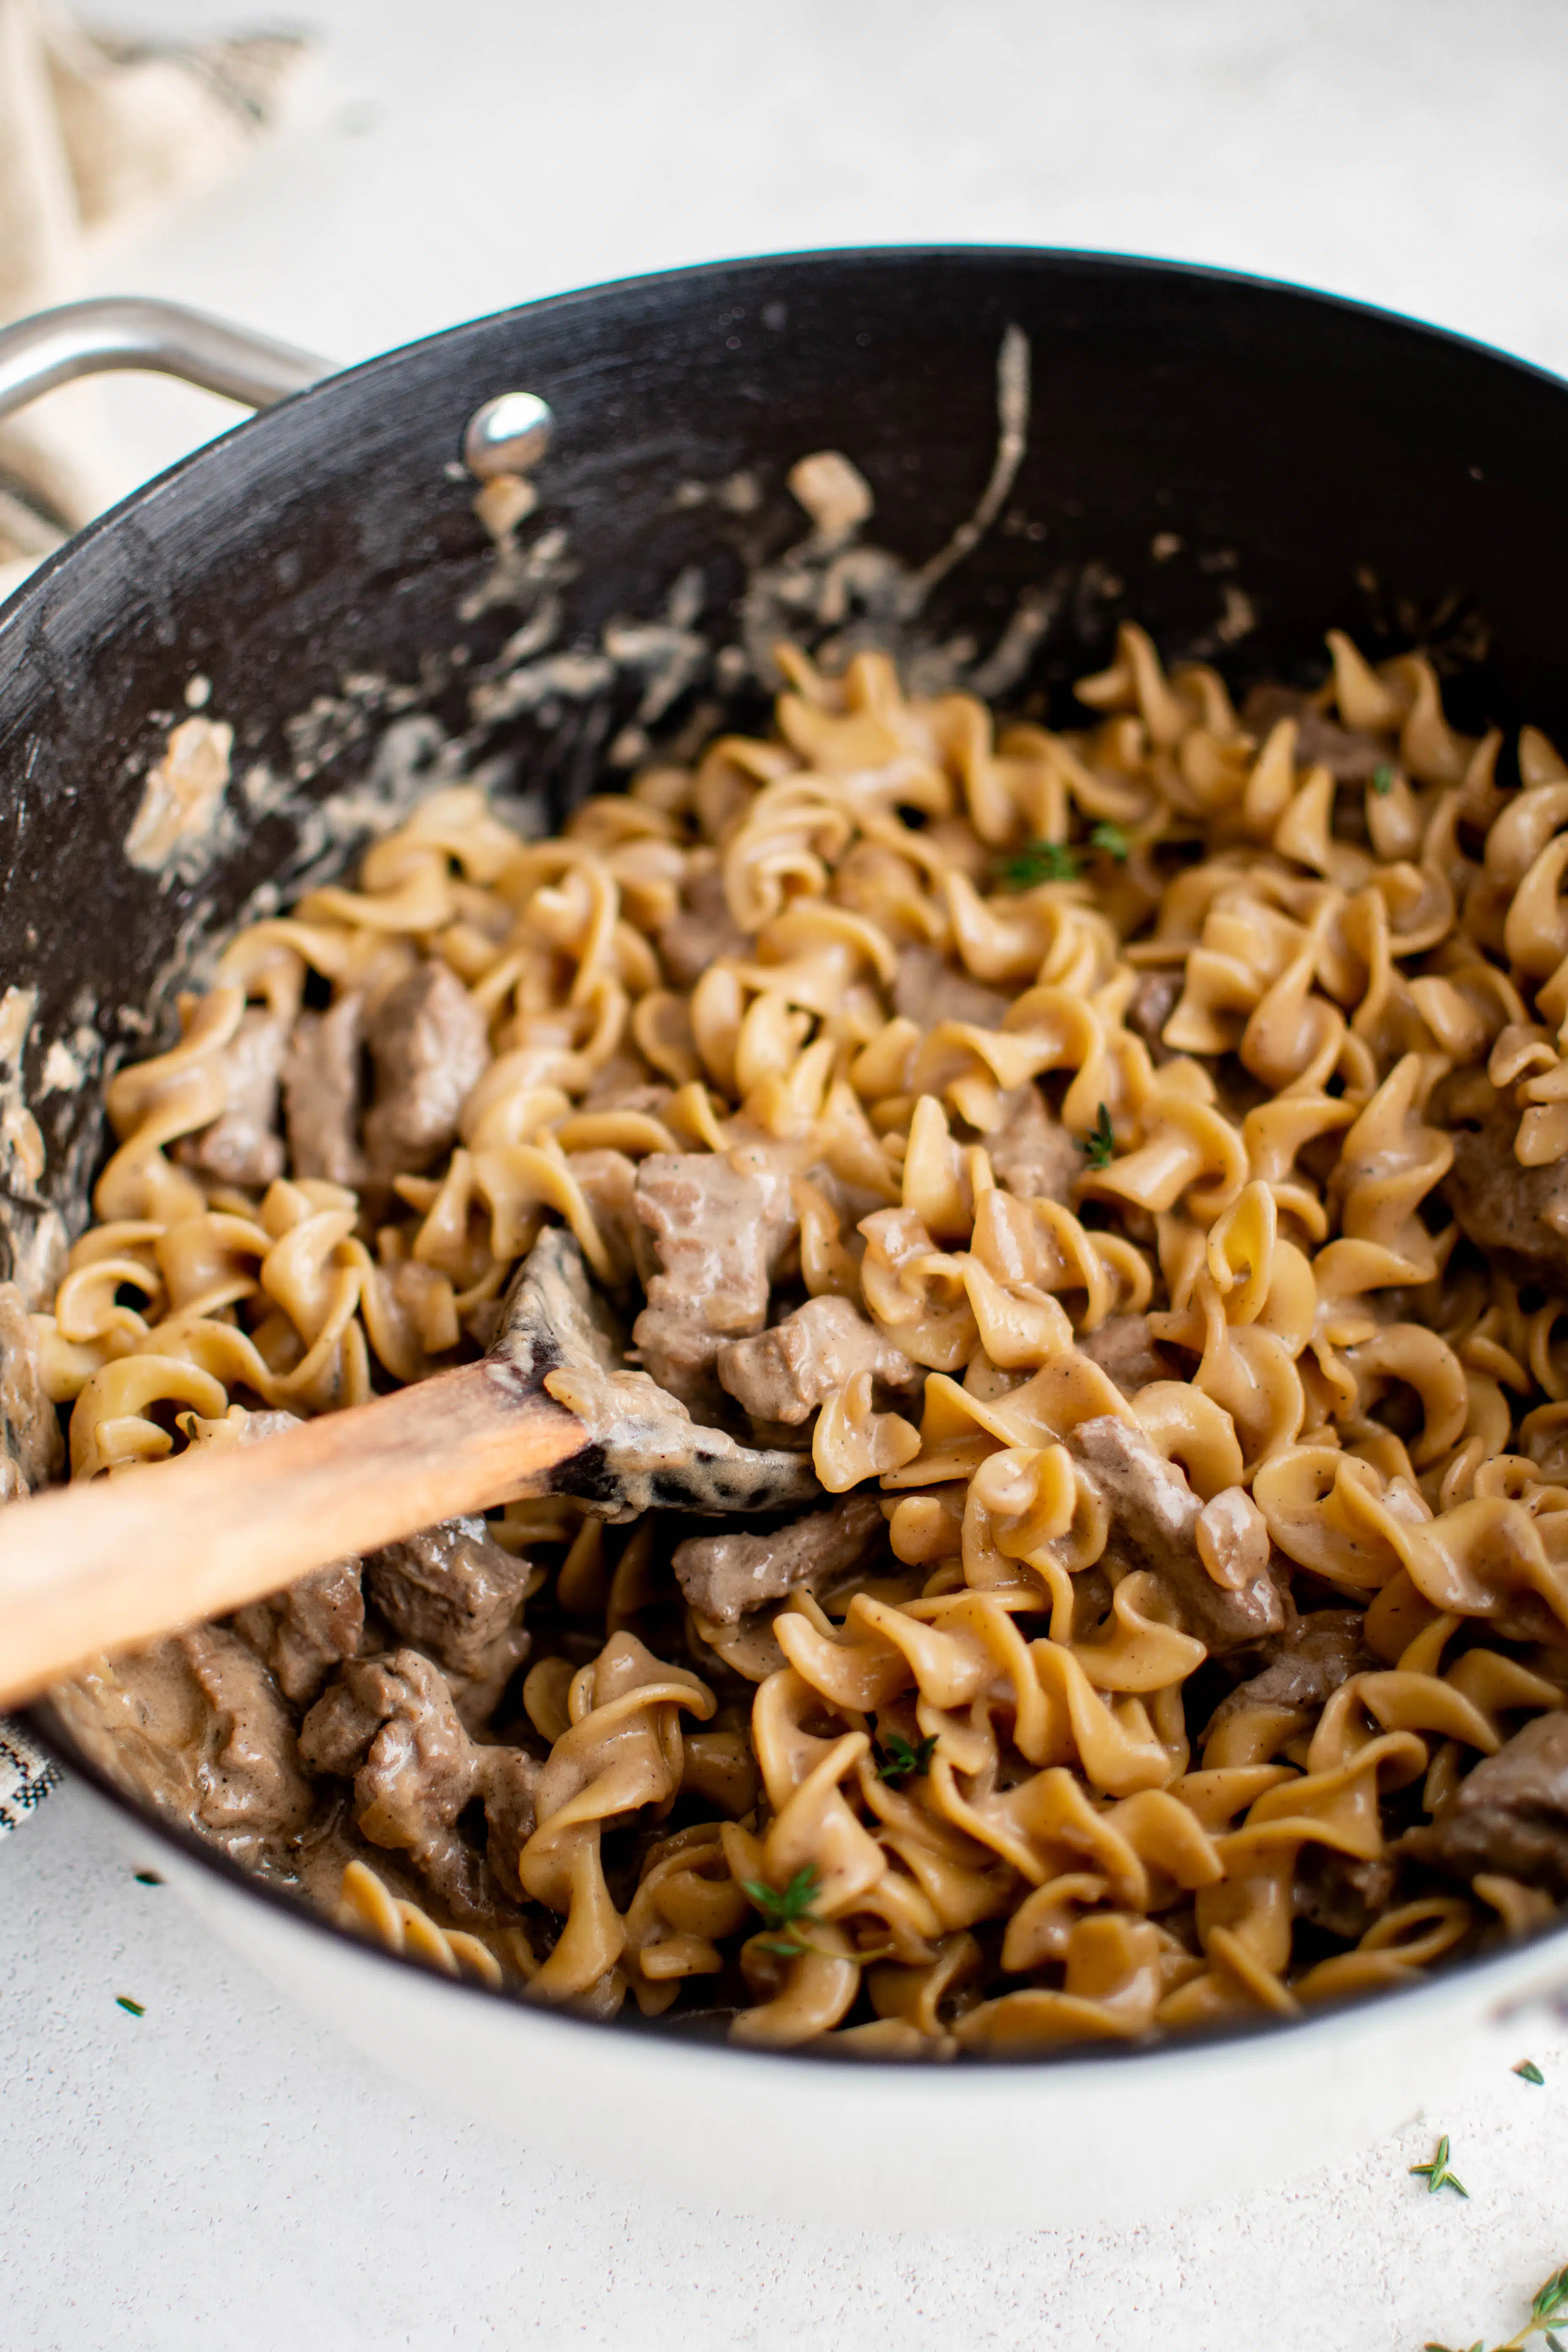 Large ceramic pot filled with cooked beef chunks and egg noodles tossed in a homemade creamy brown gravy.